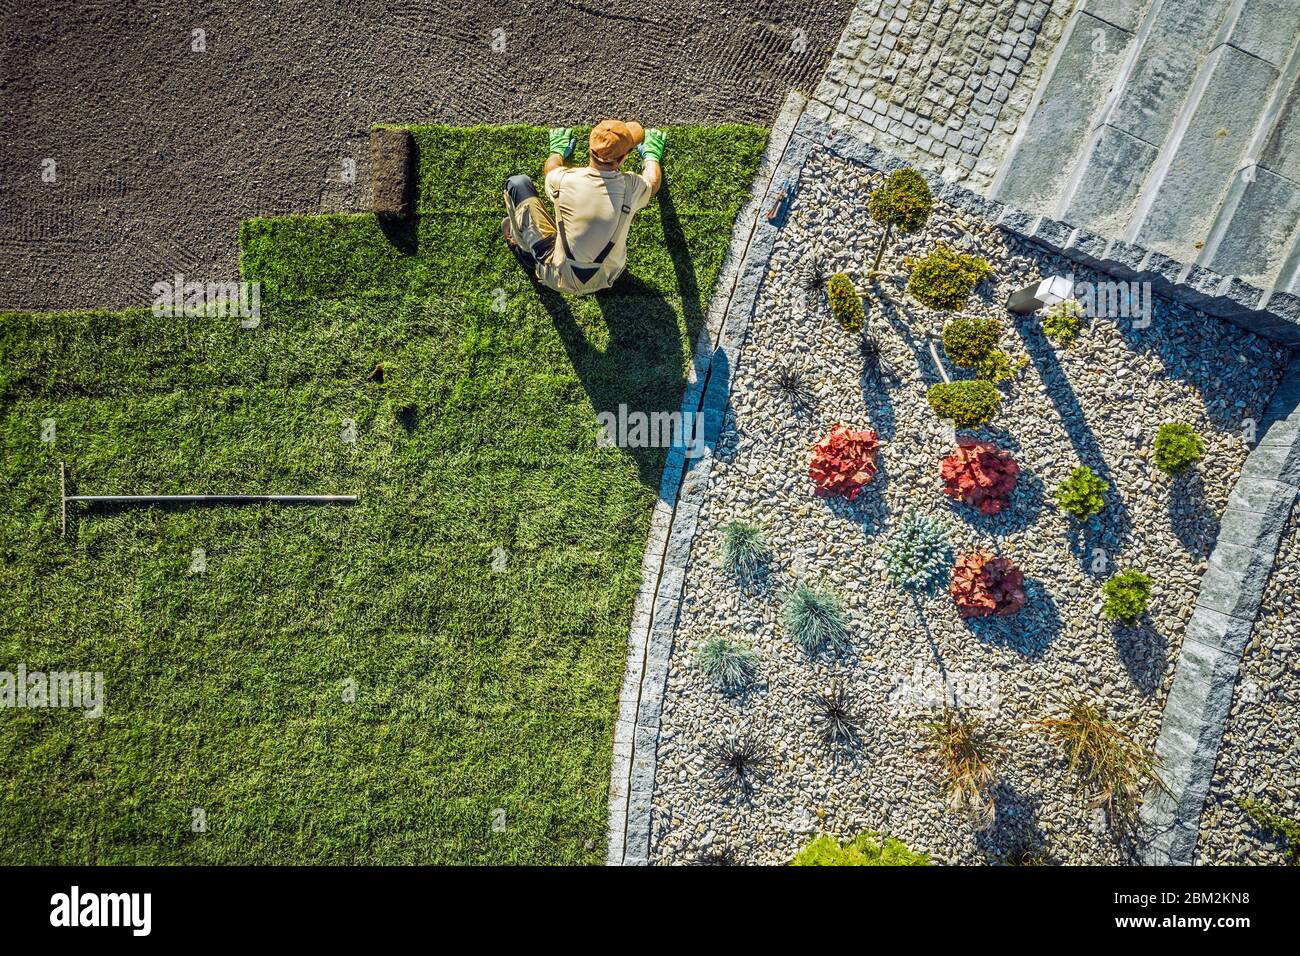 Aerial View Of Male Gardener Laying Rolls Of Sod In Large Area Of Residential Backyard. Stock Photo